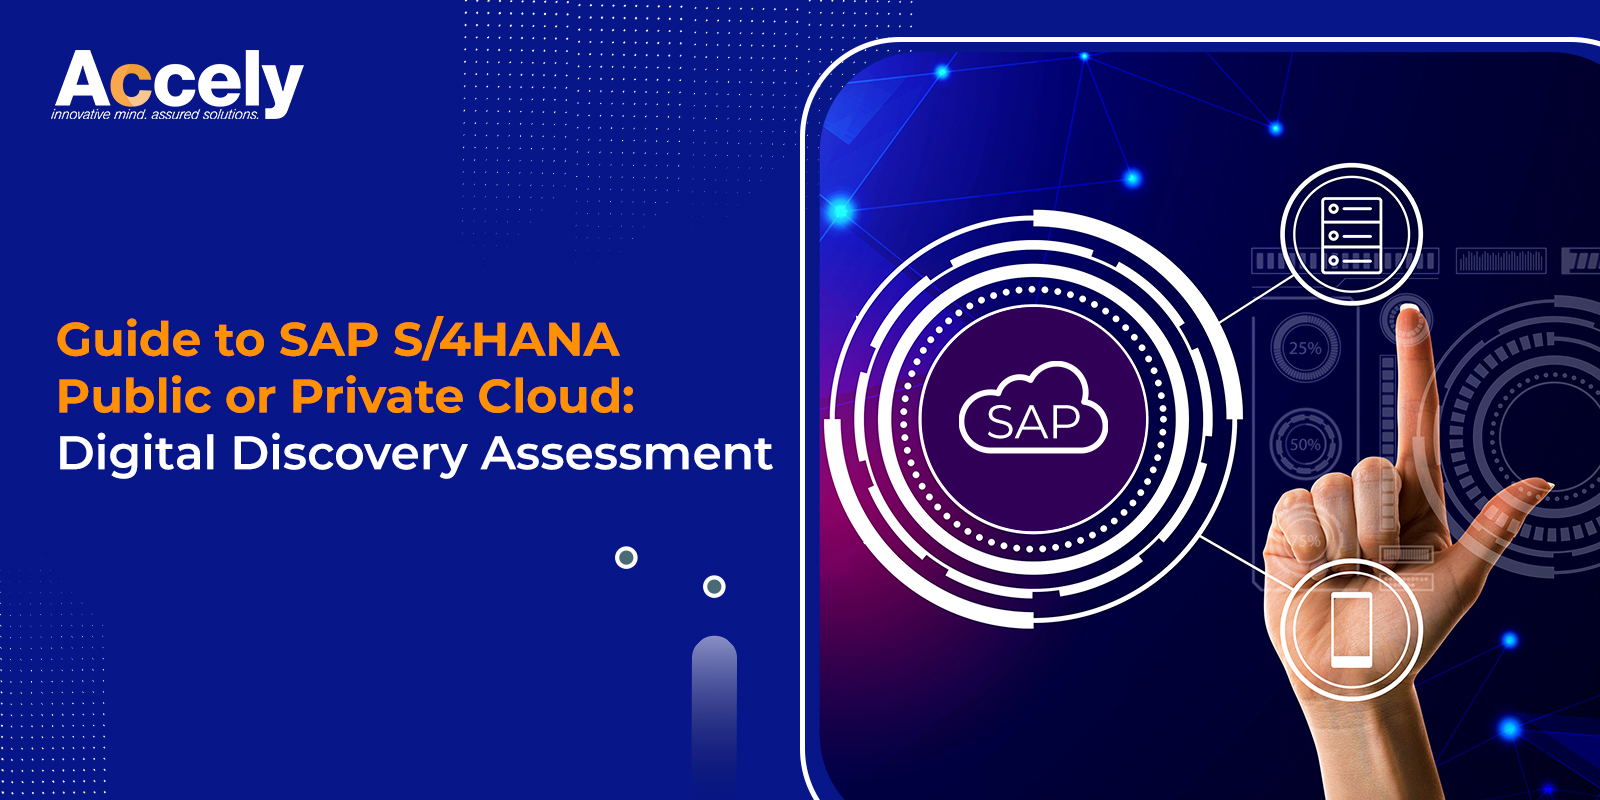 Guide to SAP S/4HANA Public or Private Cloud: Digital Discovery Assessment